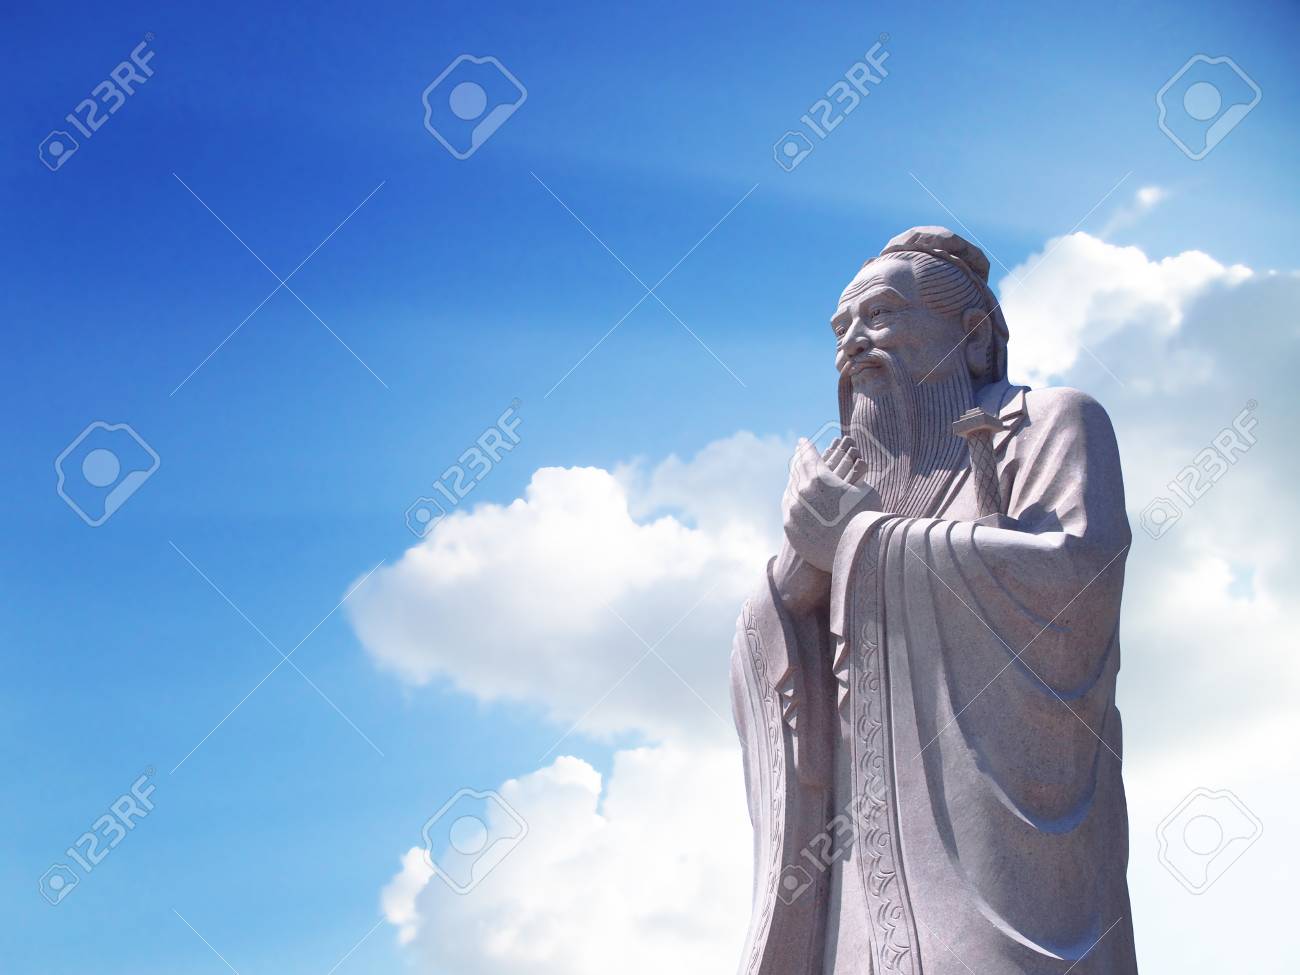 Confucius Statue With Sky Background Stock Photo Picture And